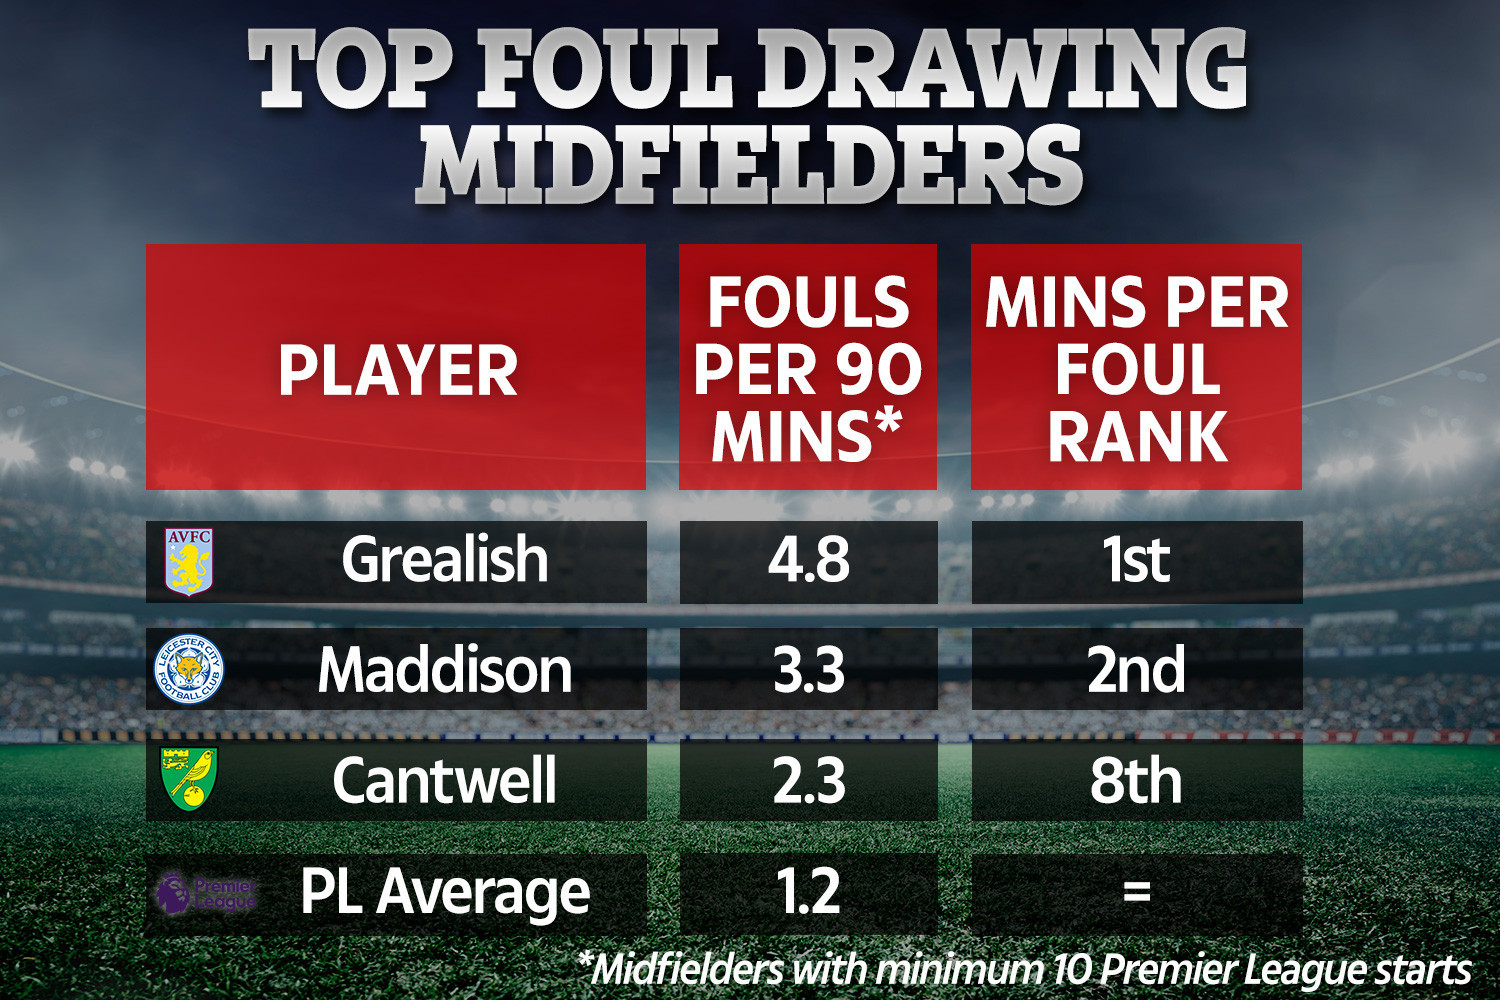 Midlands pair Jack Grealish and James Maddison are the most fouled midfielders in the Prem